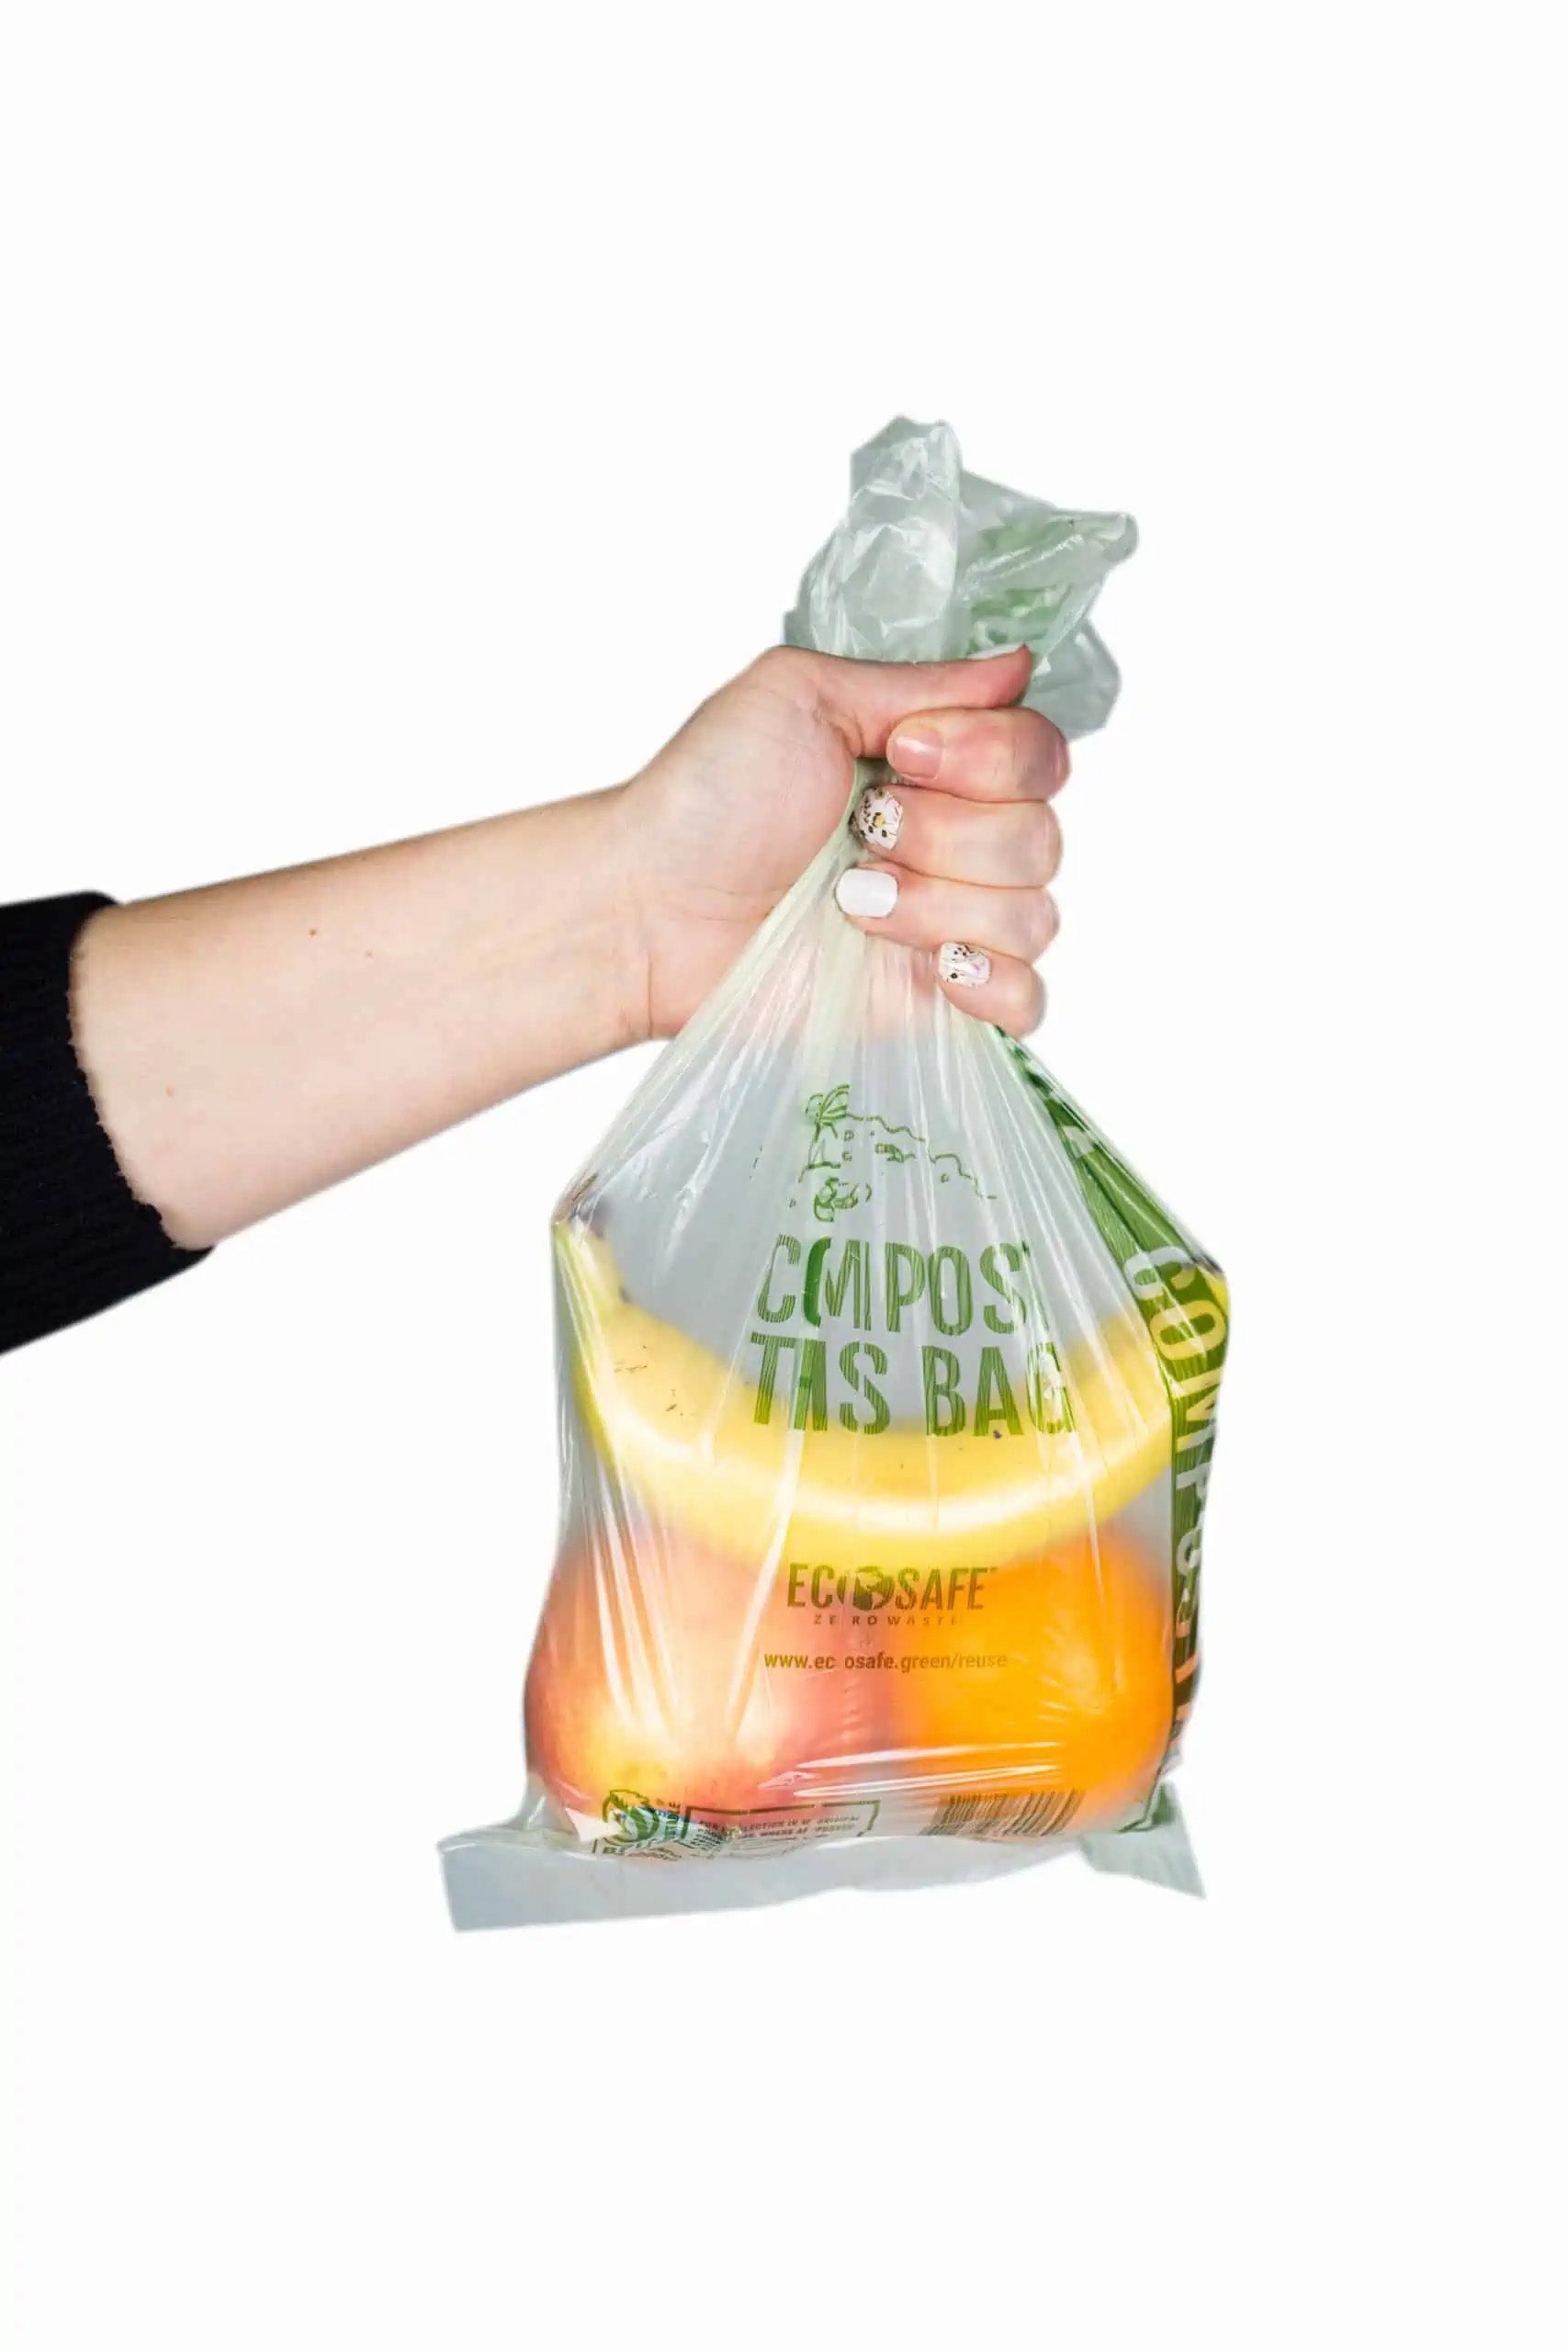 Buy Ecosafe Bio-Degradable Garbage Bags - Large Online at Best Price of Rs  null - bigbasket